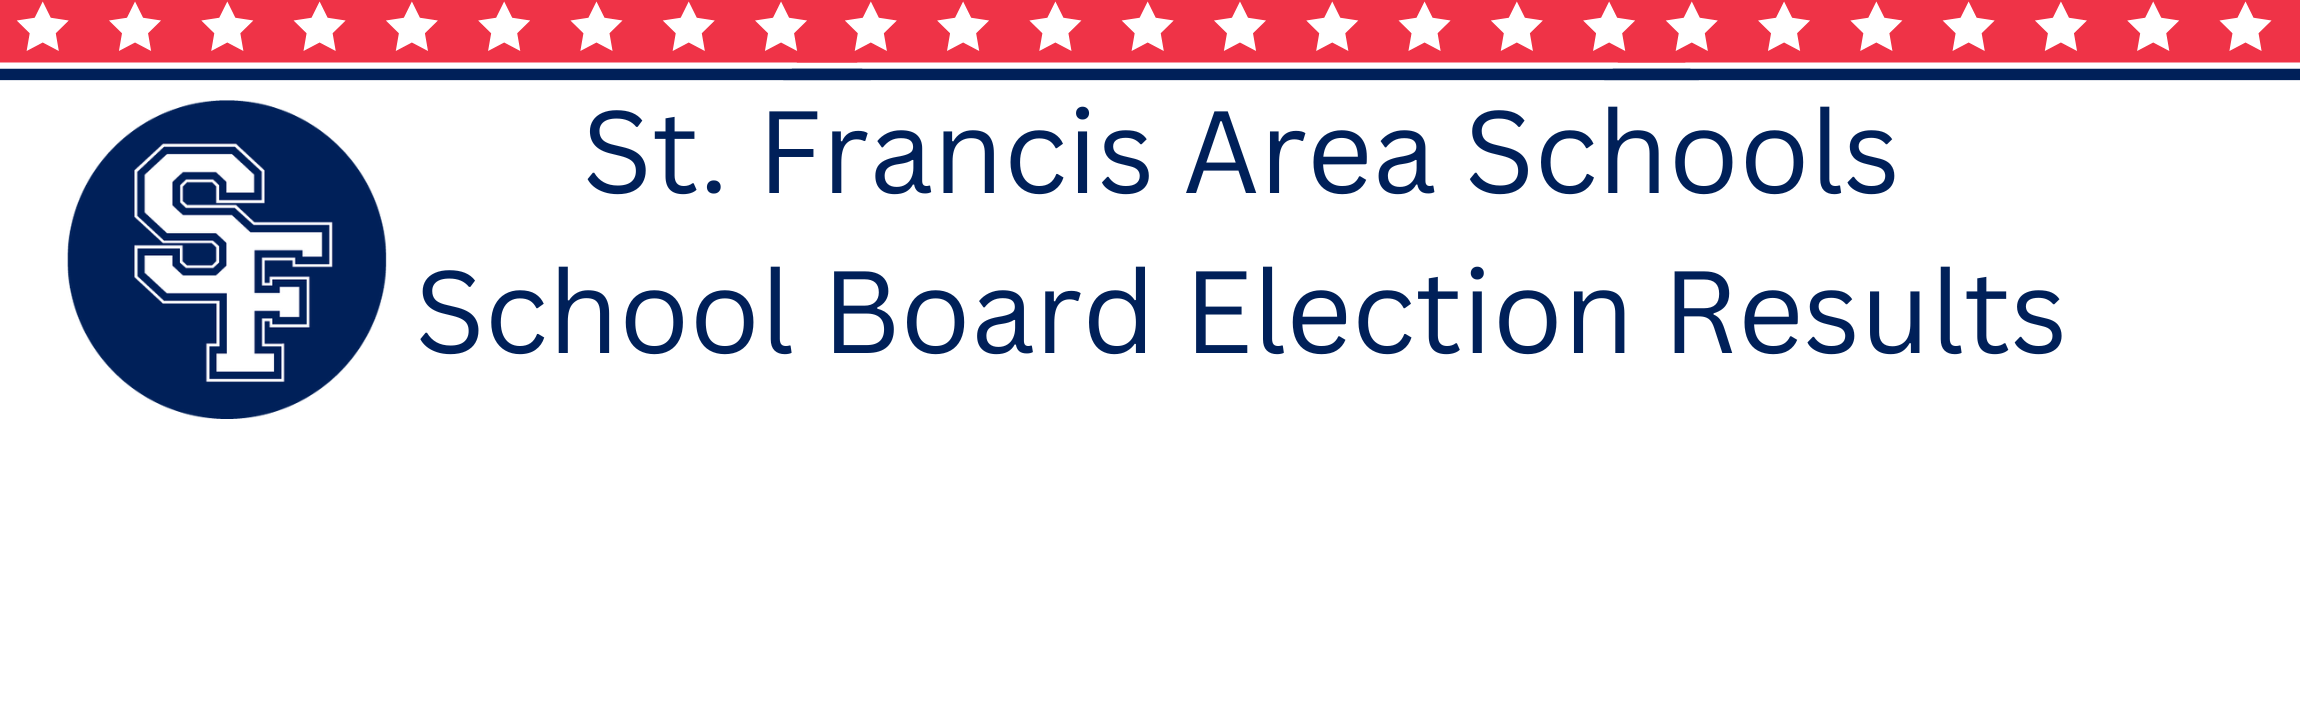 Graphic for school board election